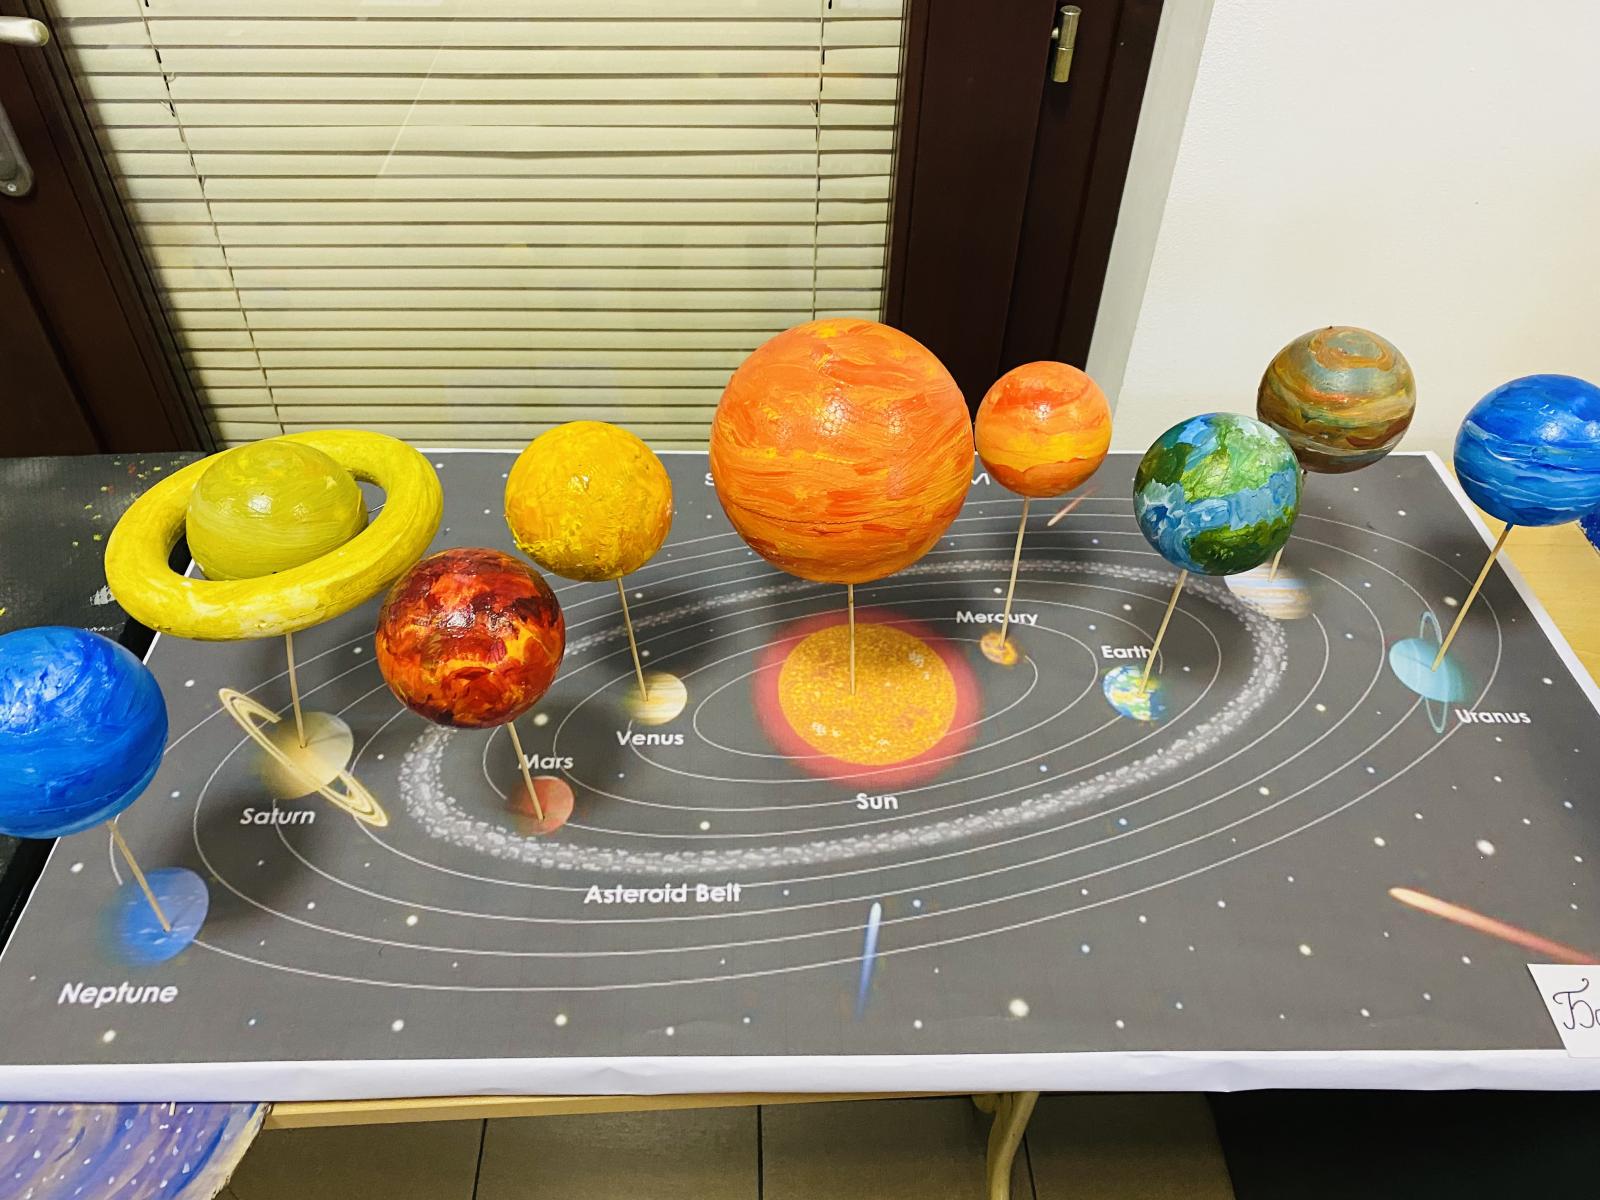 solar system project on saturn